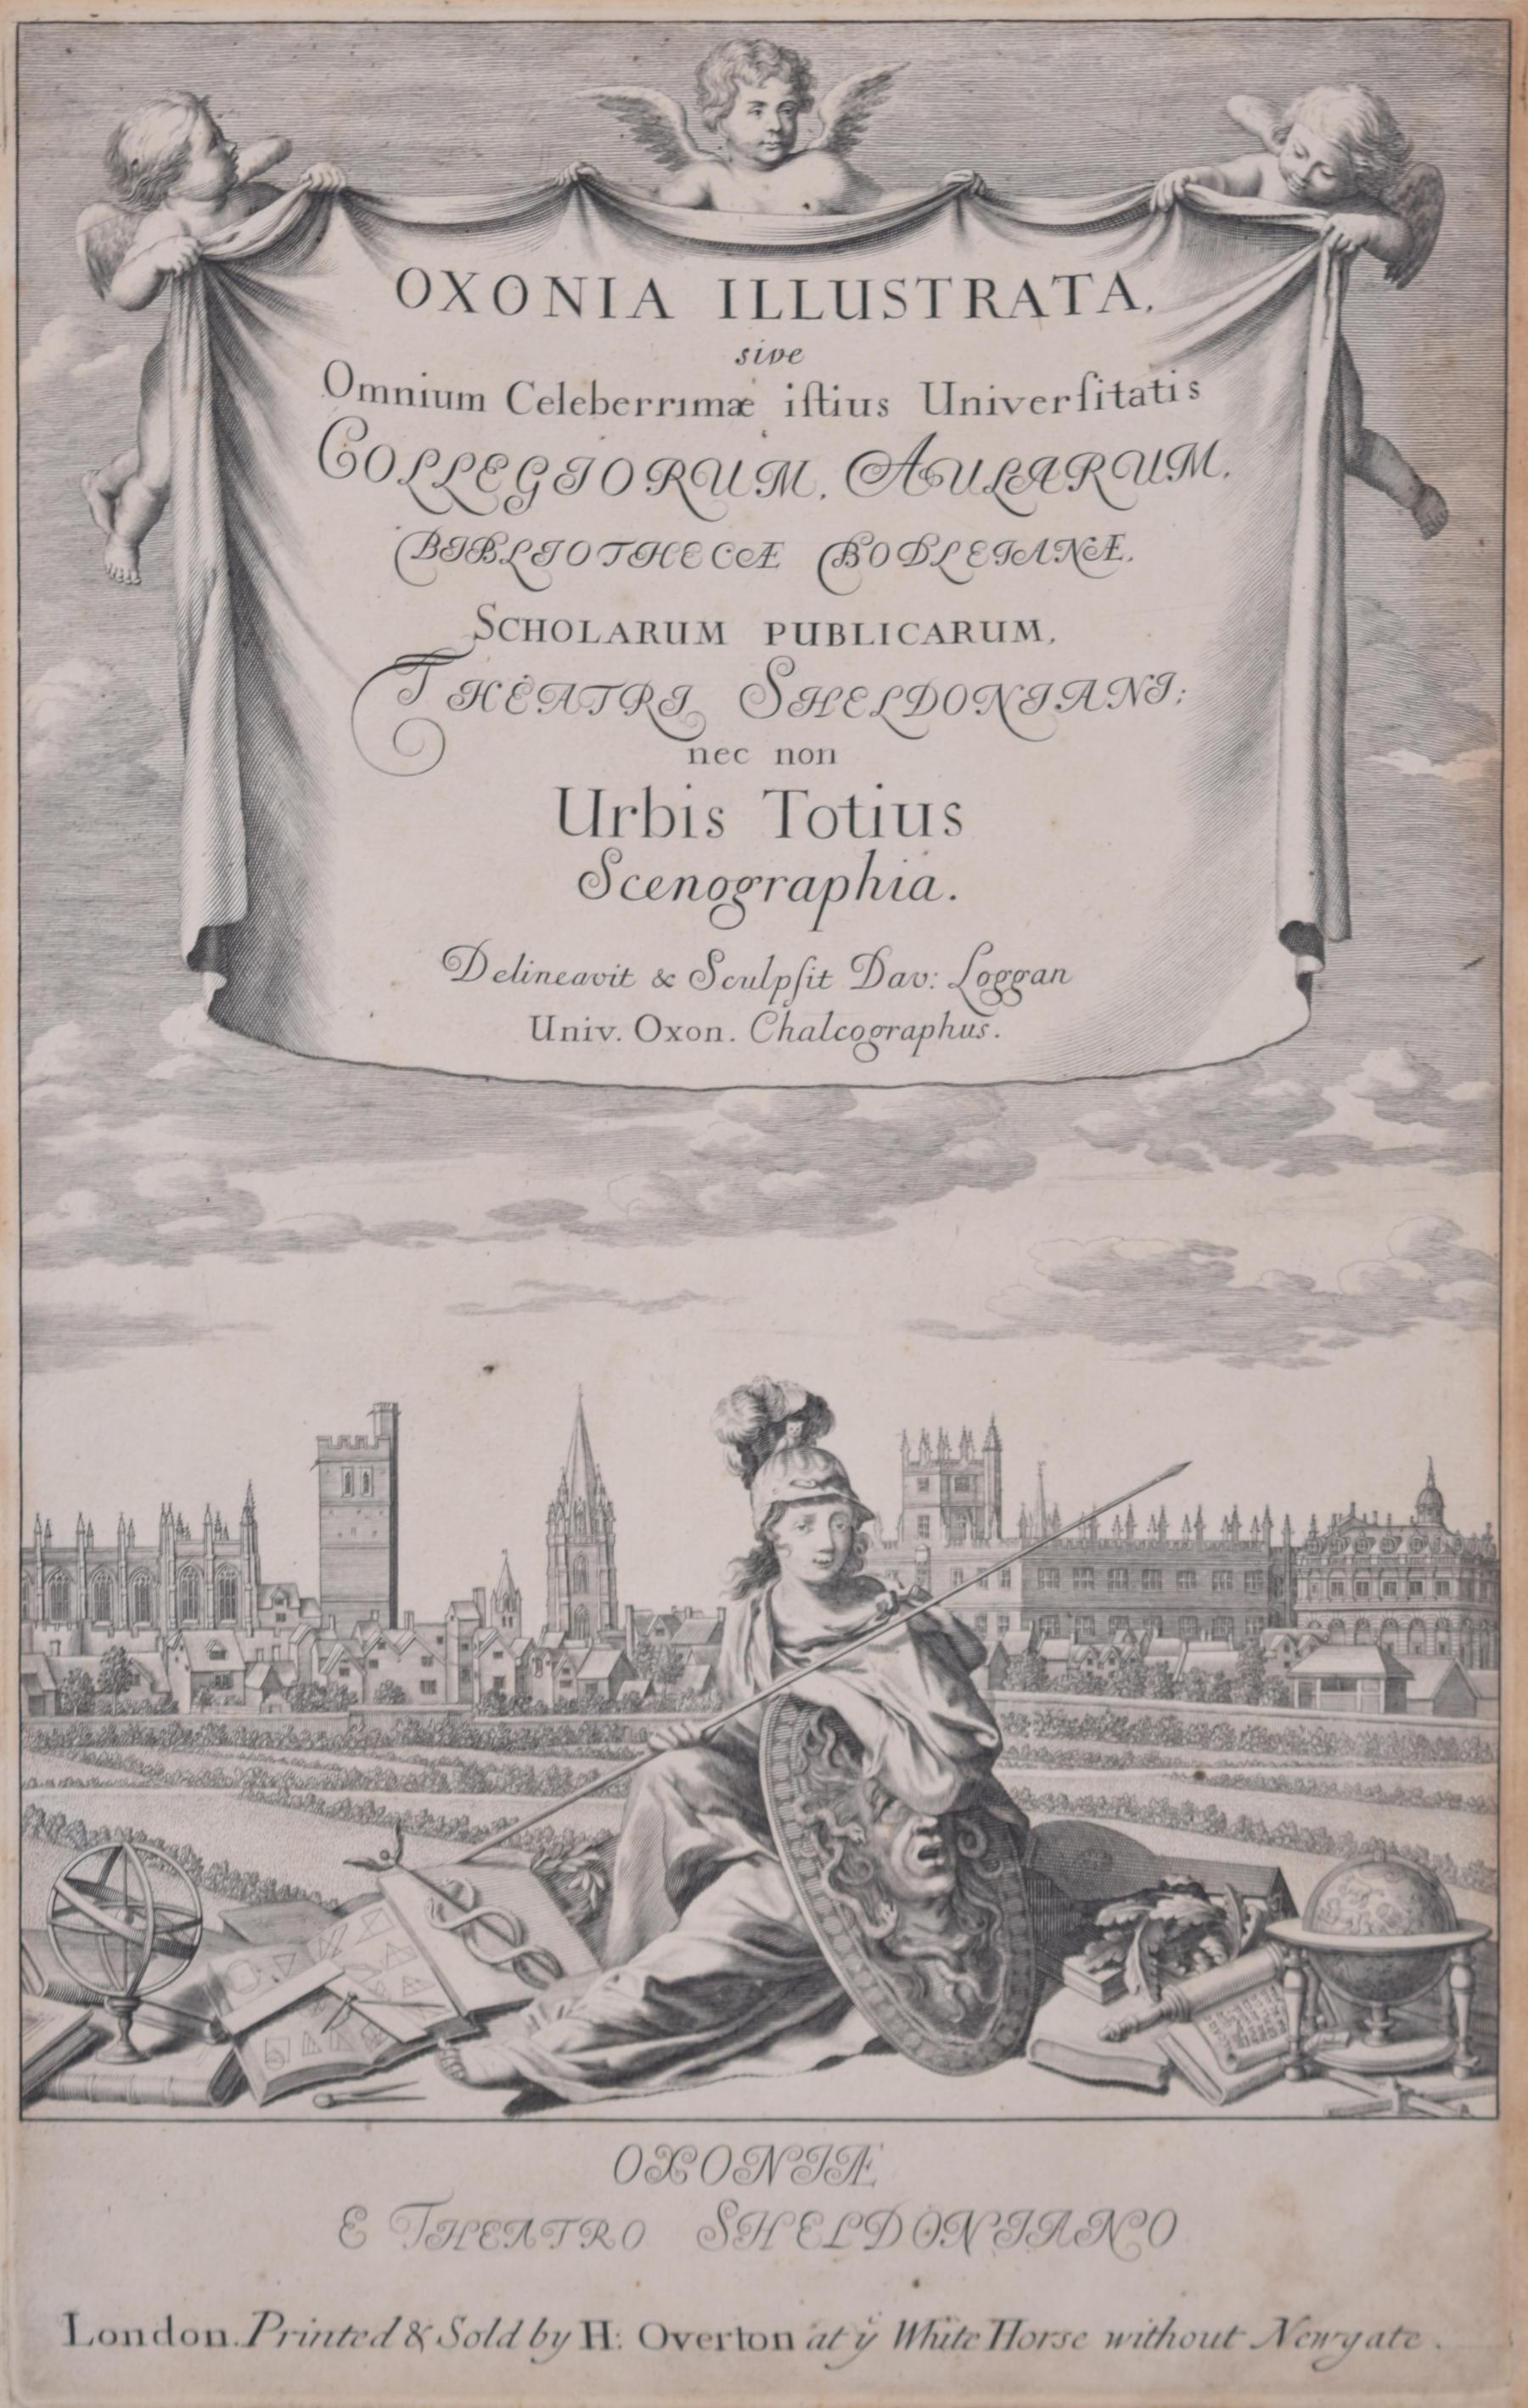 To see our other views of Oxford and Cambridge, scroll down to "More from this Seller" and below it click on "See all from this Seller" - or send us a message if you cannot find the view you want.

David Loggan (1634-1692)
Frontispiece to the Oxonia